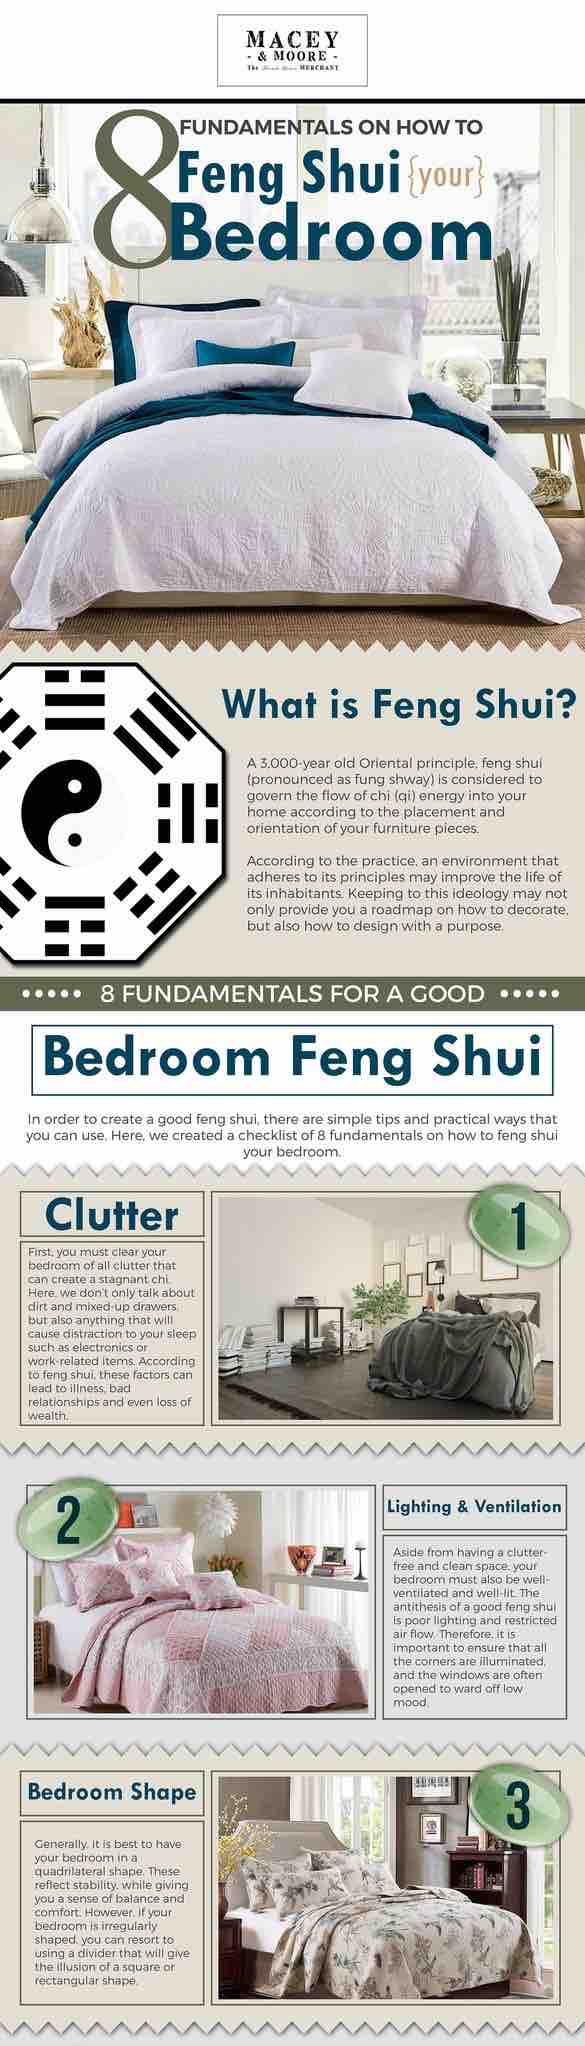 8 tips to help you Feng Shui your bedroom. Image from https://www.macey.store 